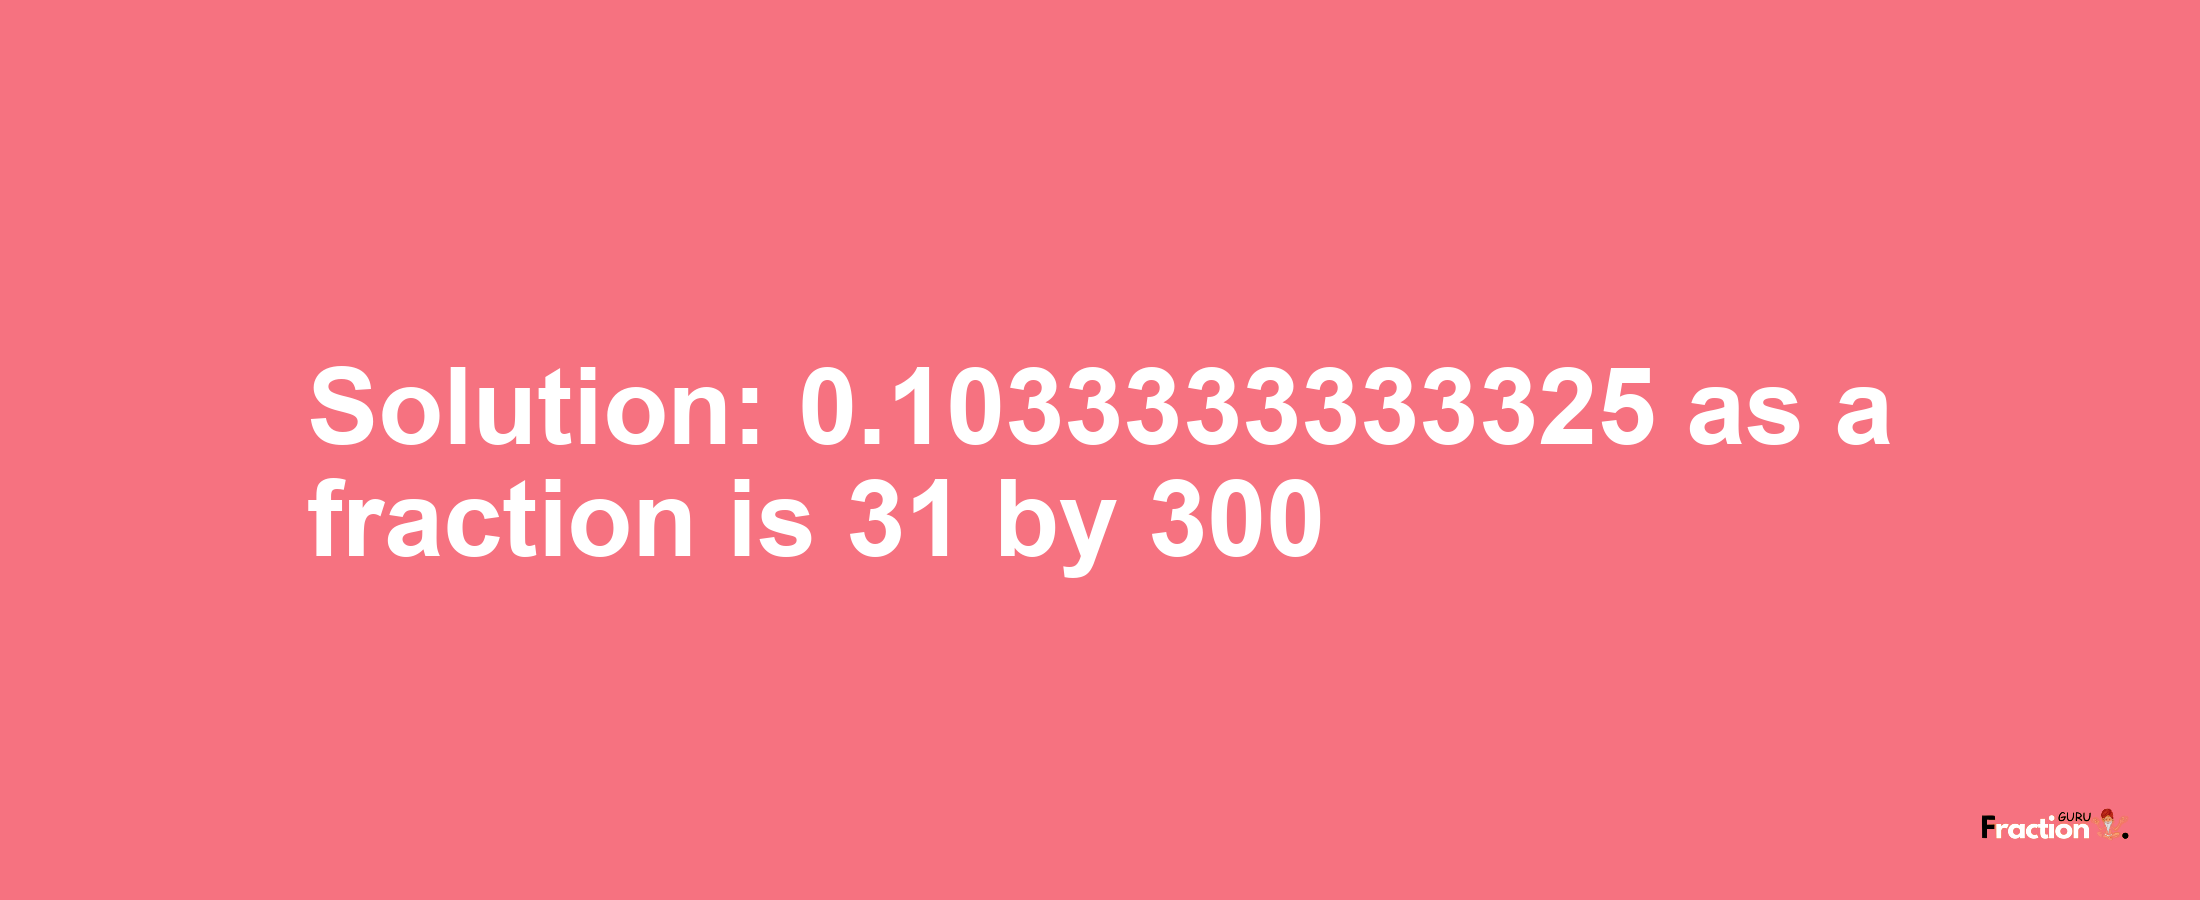 Solution:0.1033333333325 as a fraction is 31/300